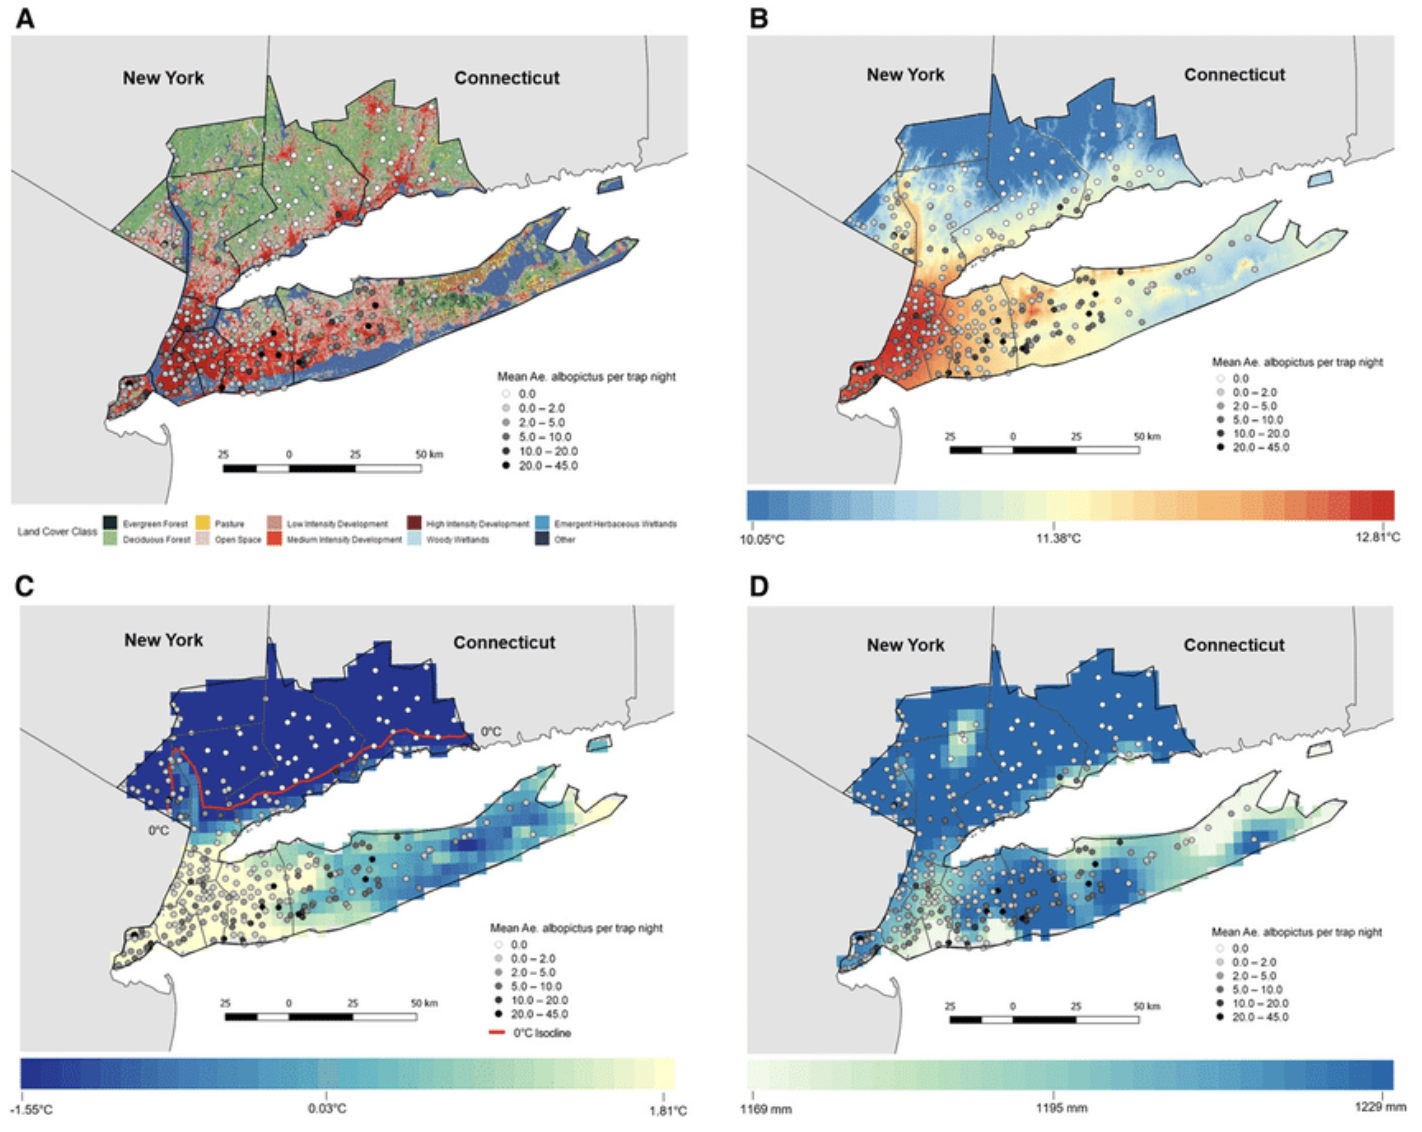 Land cover and climate across the study region, New York state and Connecticut (CT), United States. (A) Land cover classification across the study region. 